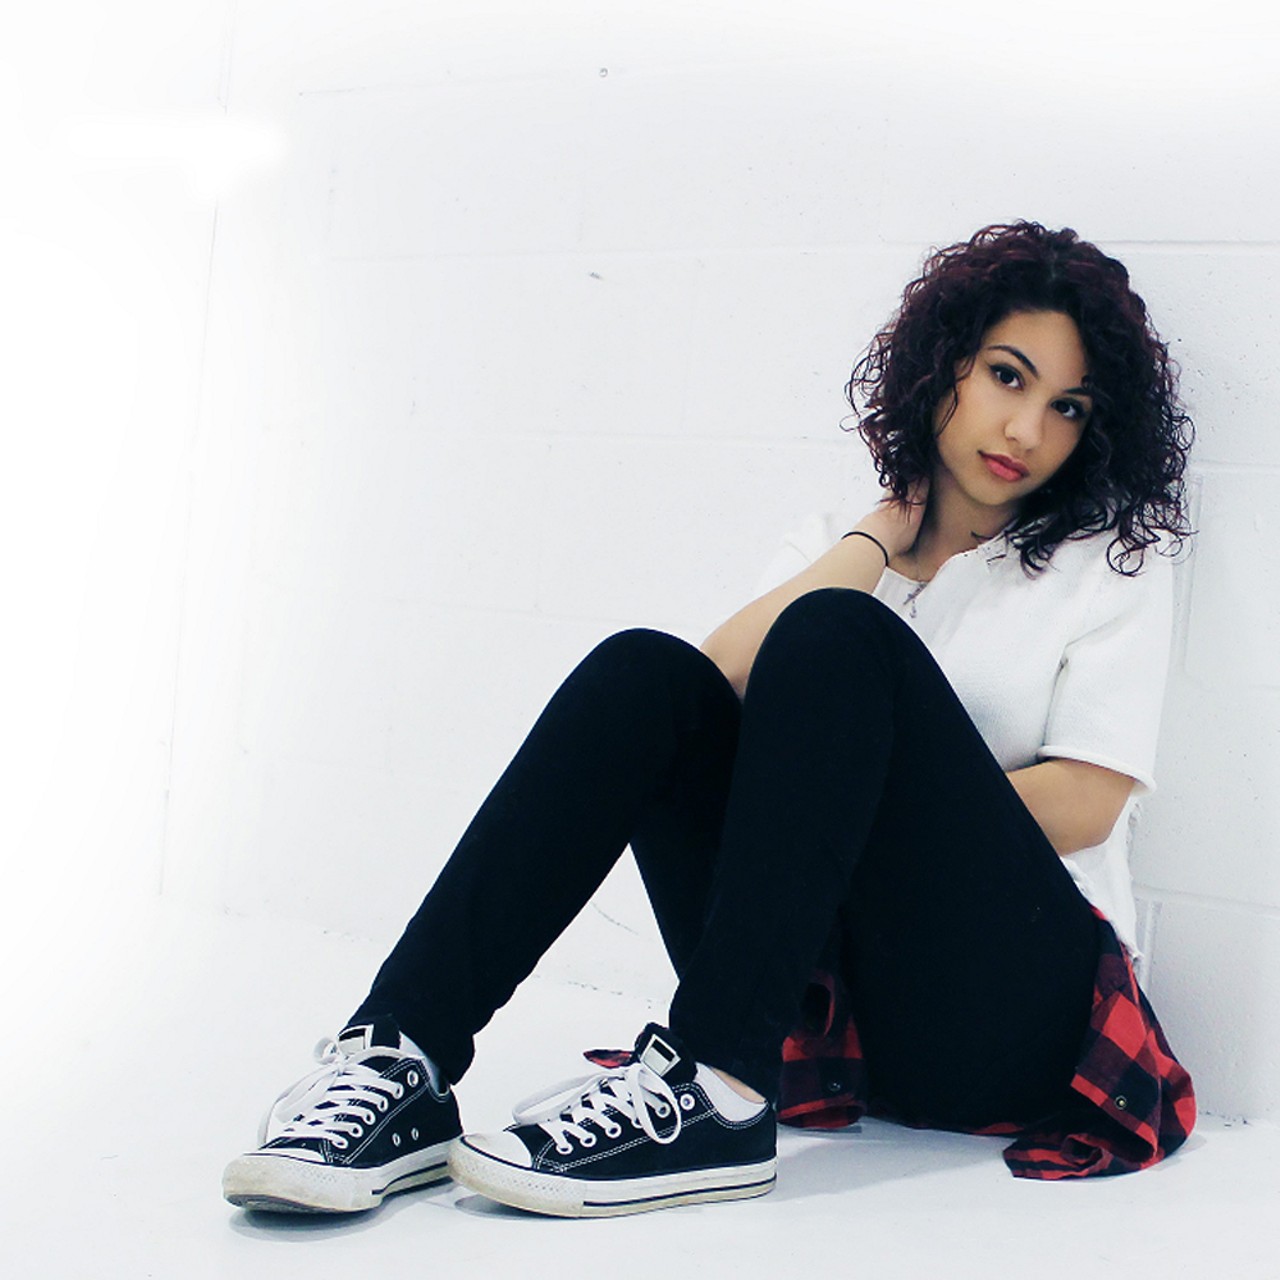 Alessia Cara- Hamtramck
Hamtramck is super hip, y&#146;all if you haven&#146;t noticed. With tons of great dive bars and restaurant gems, it&#146;s the perfect place for a new generation of youths to move to. Alessia Cara has that vibe going on so we can see her perfectly fitting in. (Photo via Wikipedia)